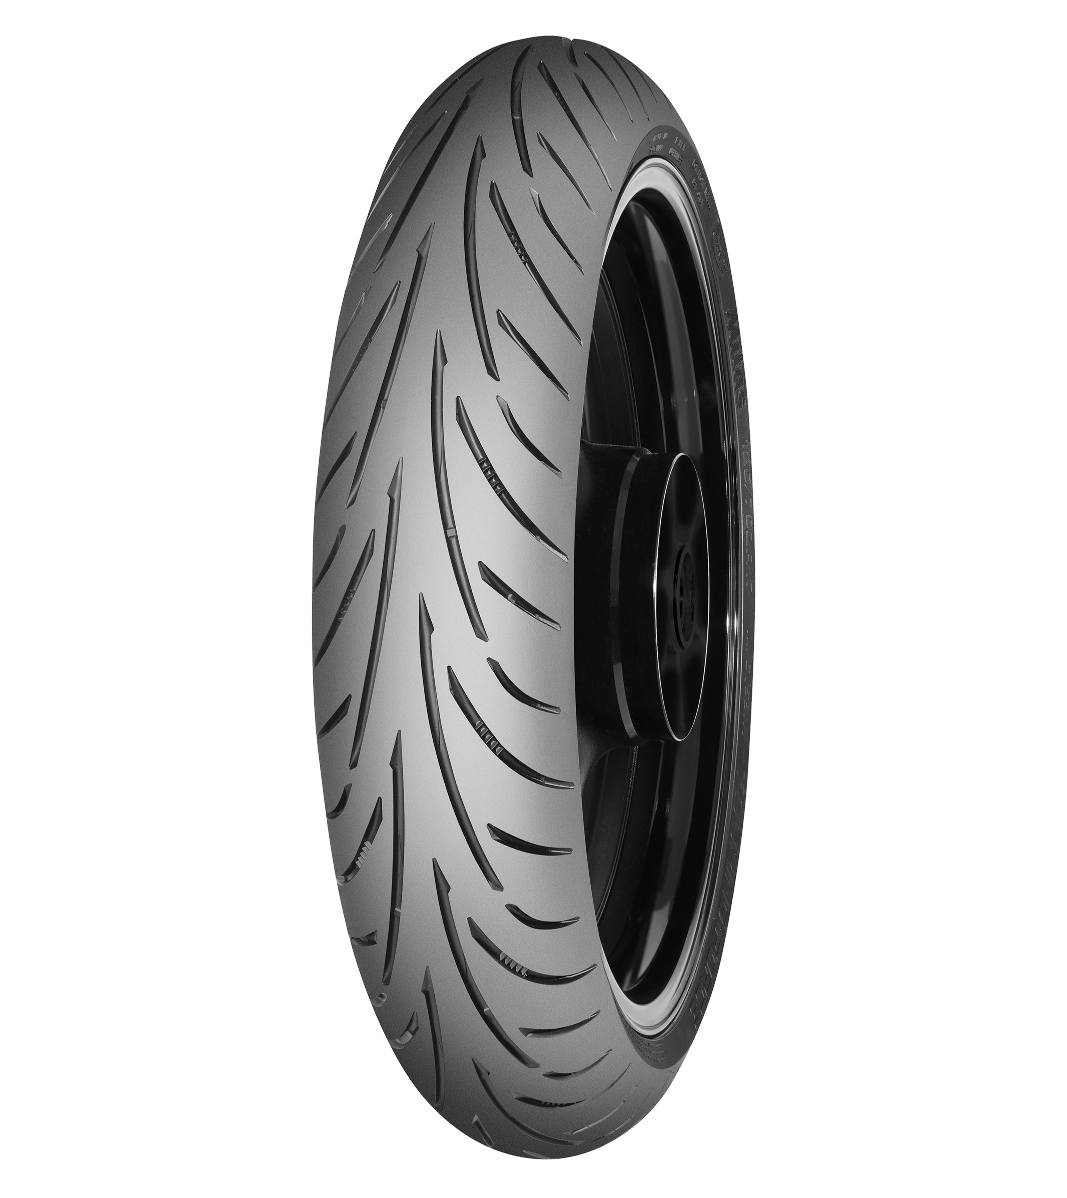 Mitas TOURING FORCE 110/80ZR19 Trail ON Trail (59W) No Stripe Tubeless Front Tire, 608377, 110/80ZR19, Front, Touring-Force, Trail, Trail ON, Tires - Imported and distributed in North & South America by Lindeco Genuine Powersports - Premier Powersports Equipment and Accessories for Motorcycle Enthusiasts, Professional Riders and Dealers.